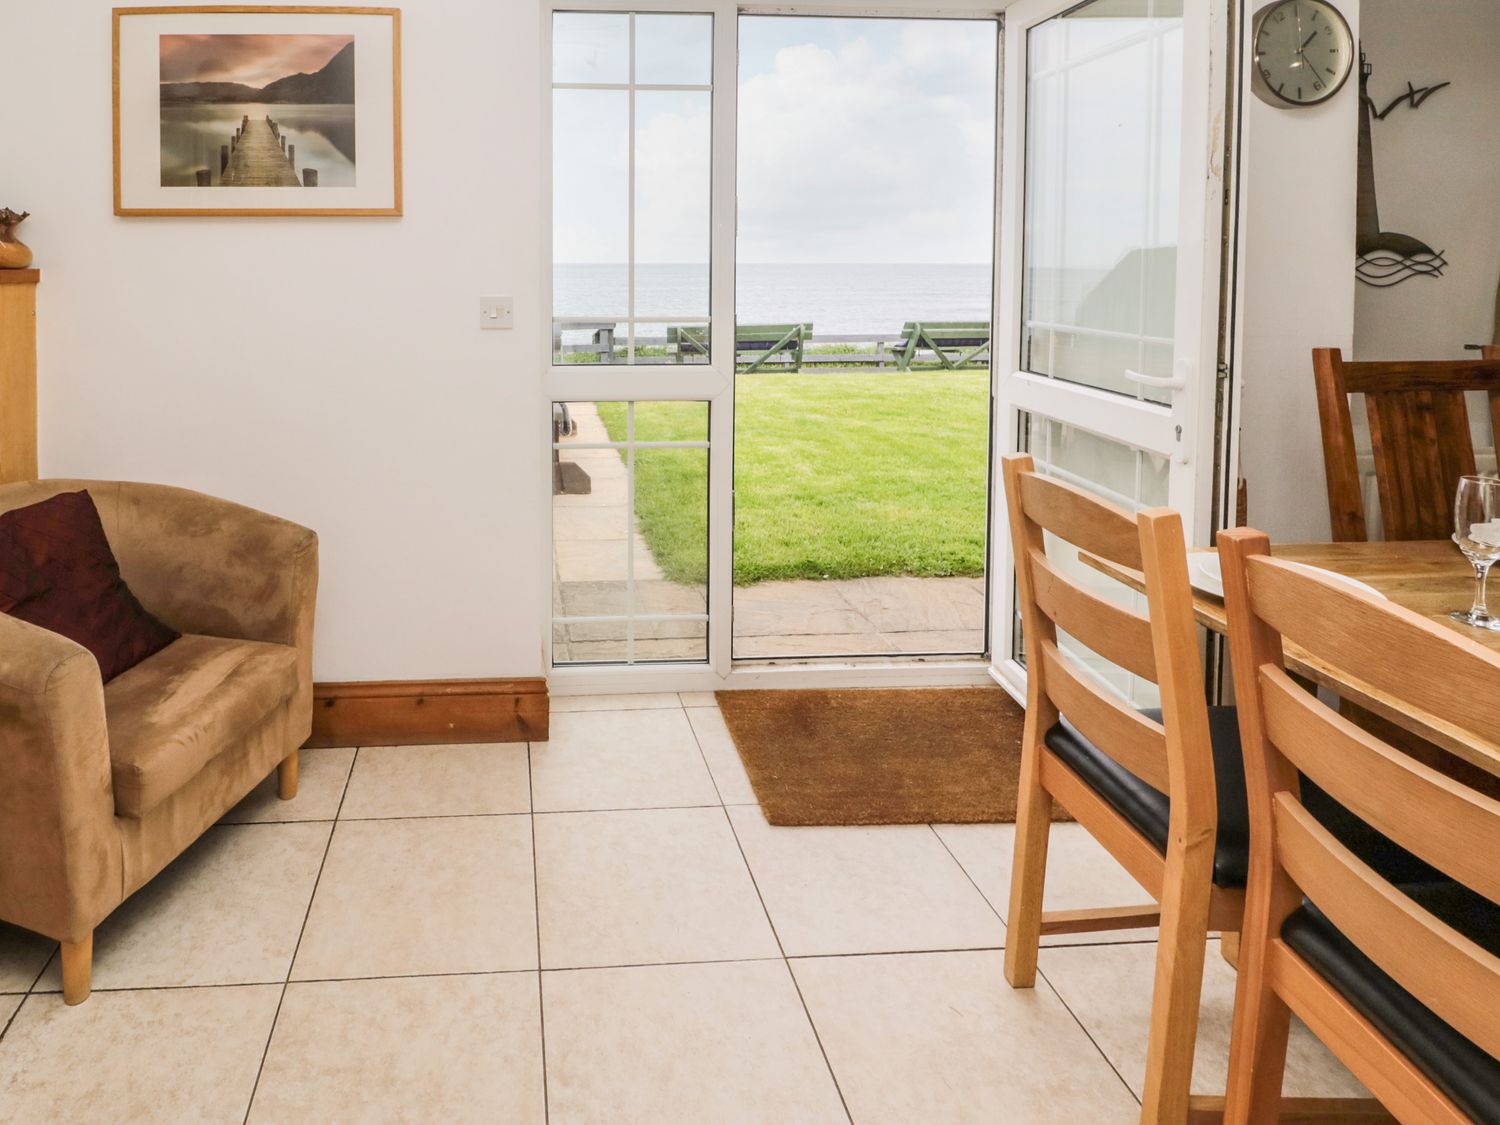 Waters Edge is in Beadnell, Northumberland, 6bed, hot tub, dog-friendly, on the beach, lovely views.